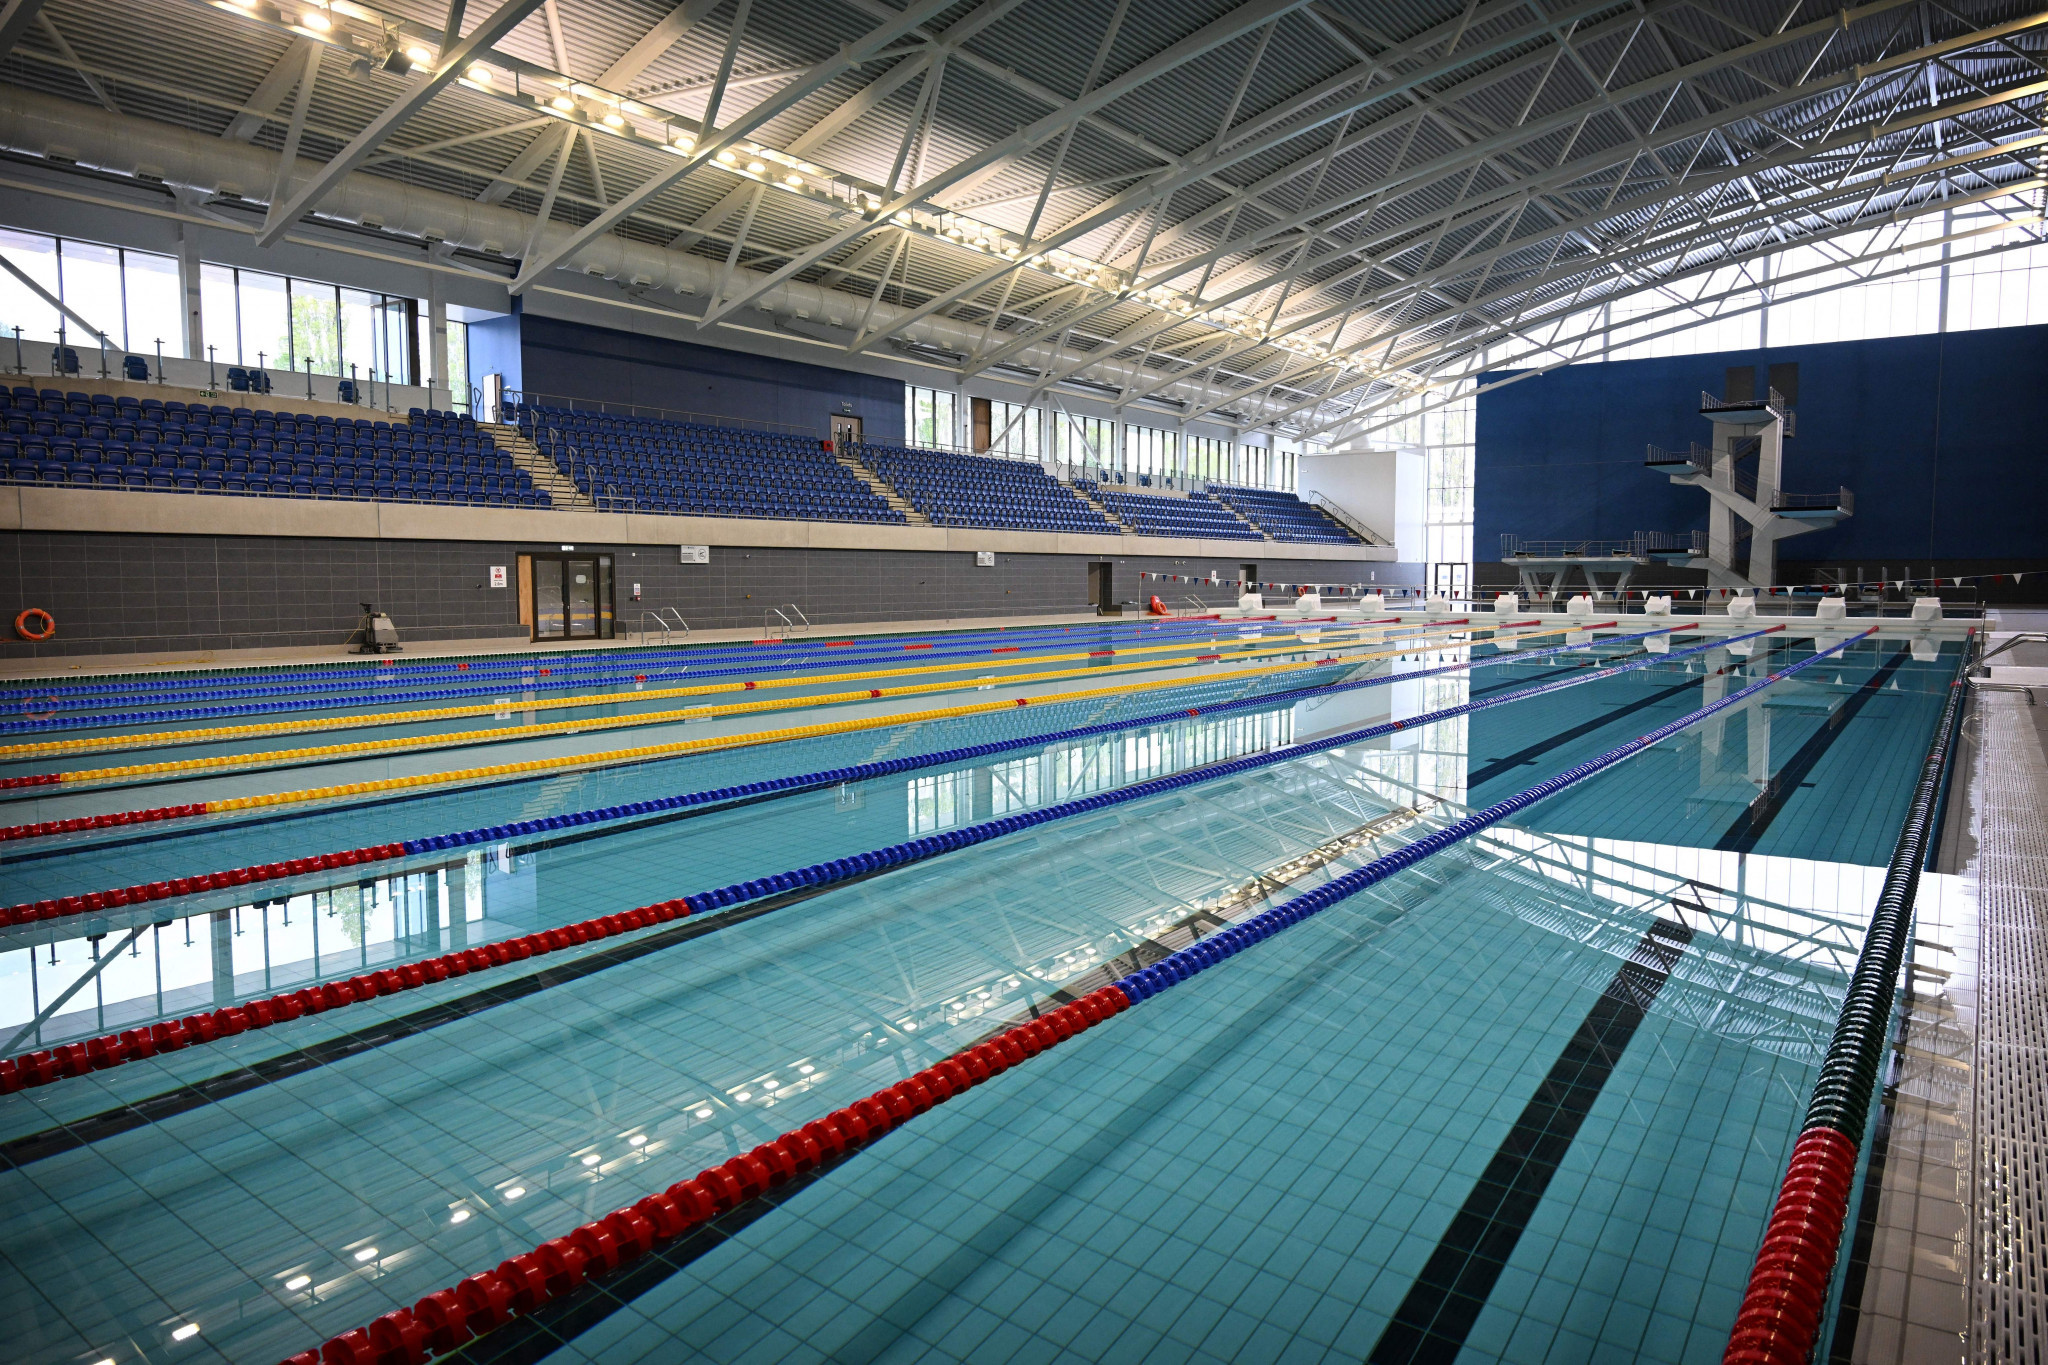 Sandwell Aquatics Centre is the only newly-built venue for Birmingham 2022 ©Getty Images